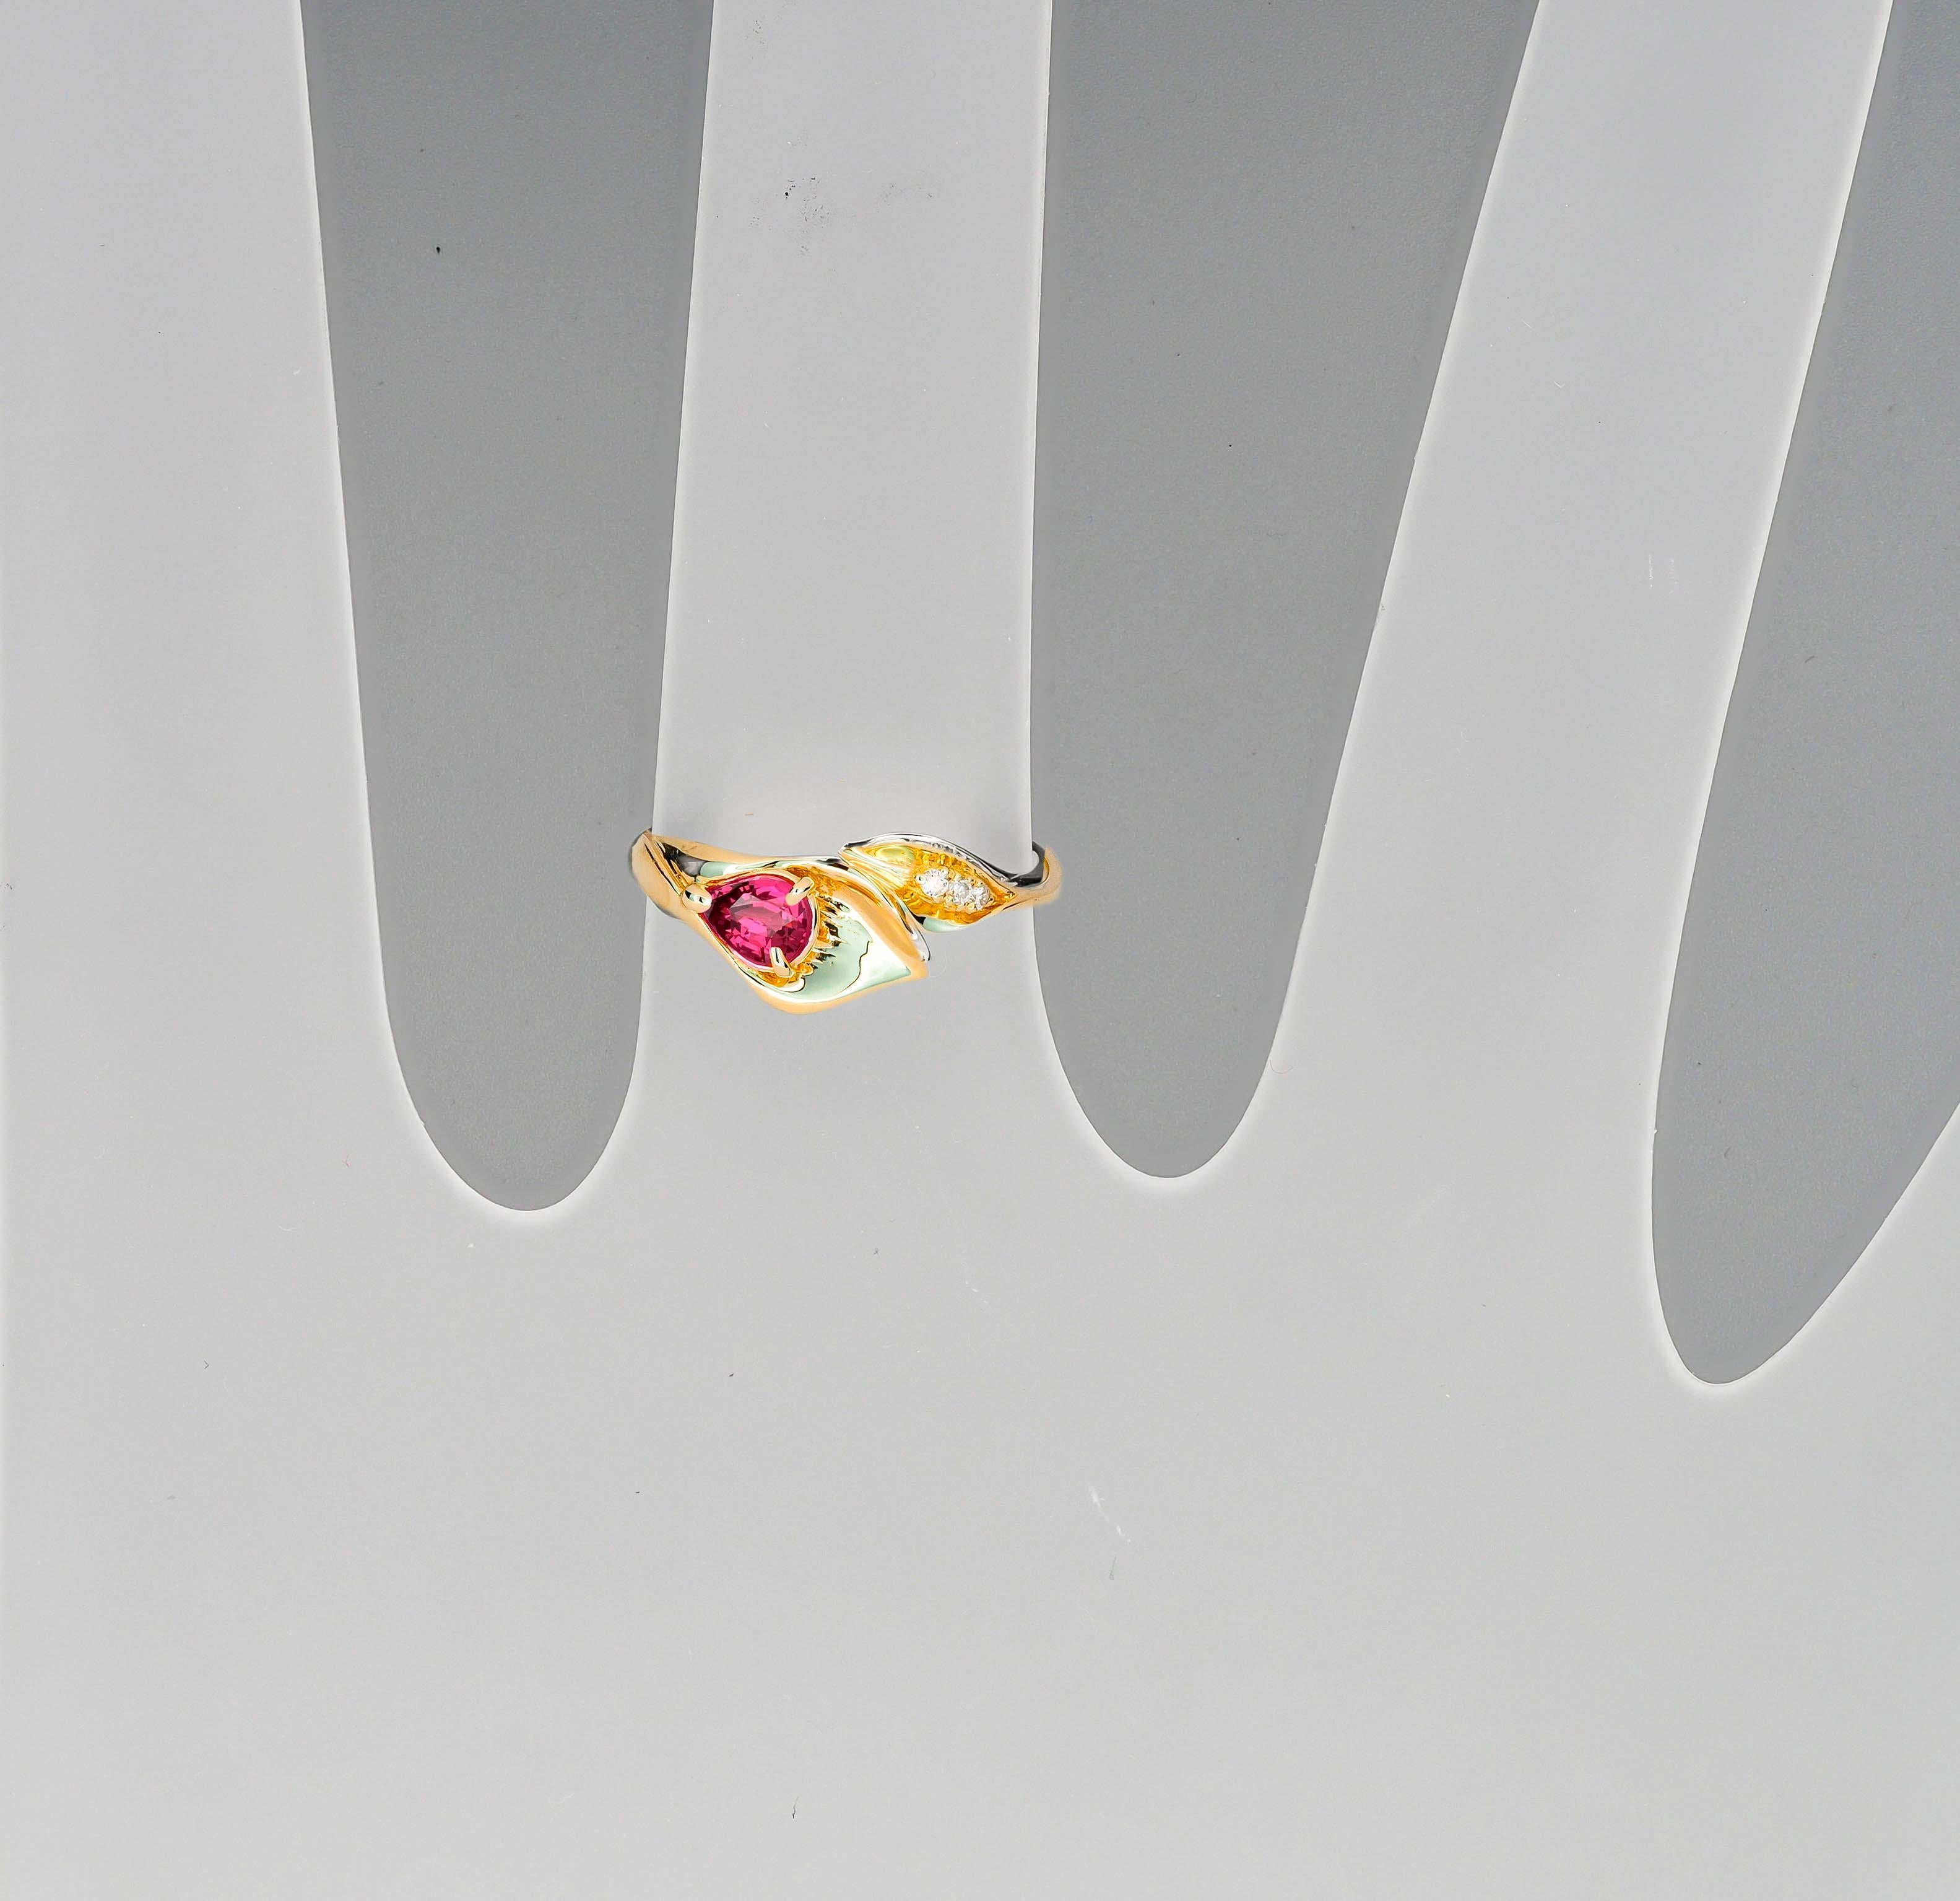 Women's Lily Calla Gold Ring, 14 Karat Gold Ring with Garnet and Diamonds